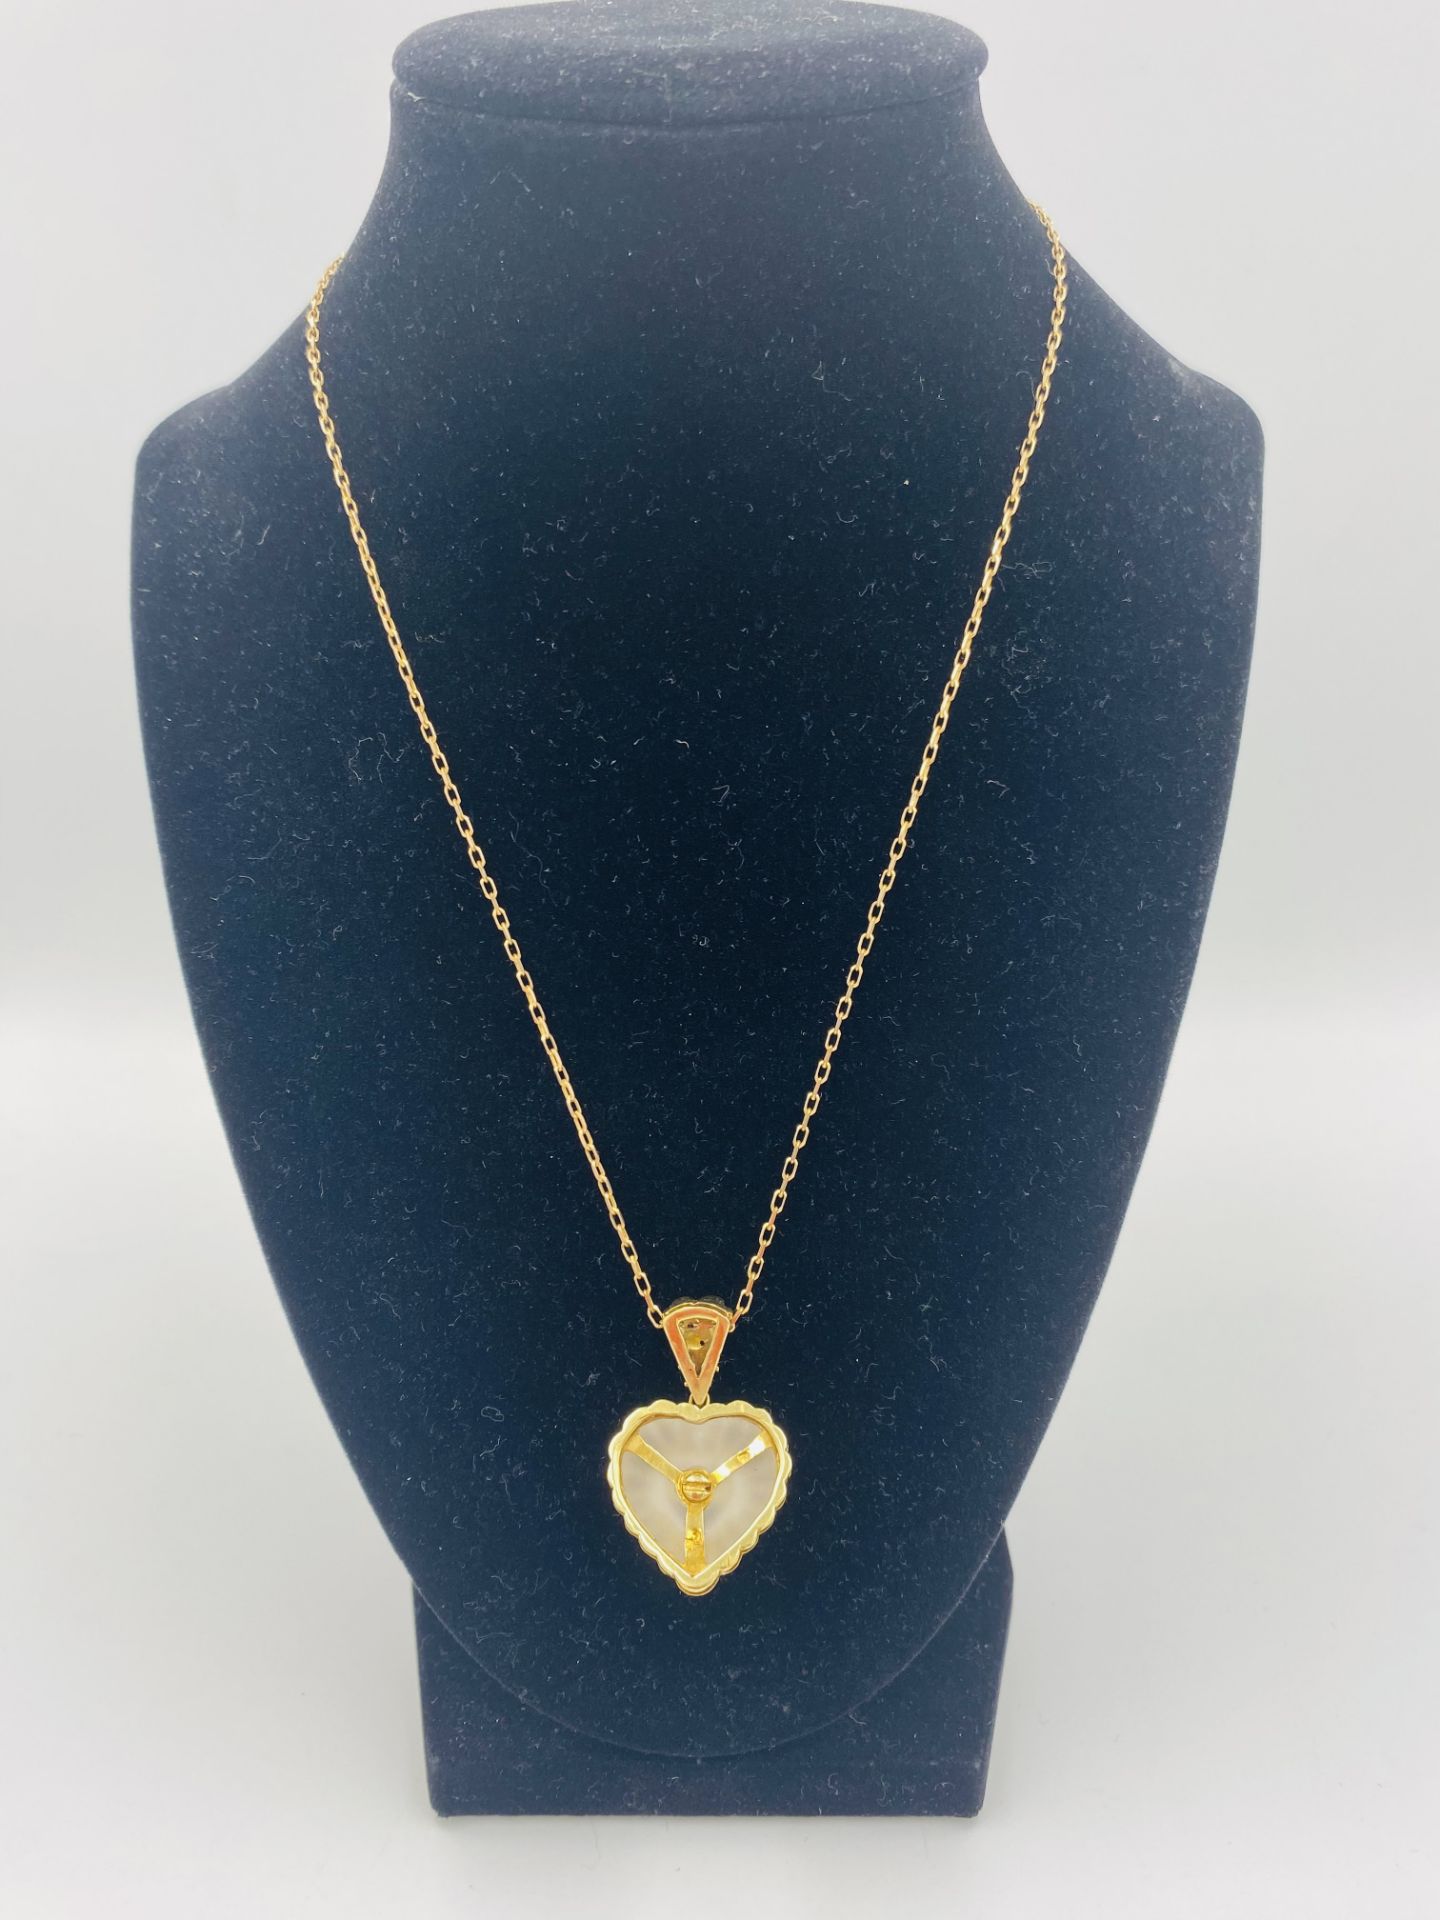 Rock crystal heart shaped pendant with 18ct gold mount - Bild 3 aus 6